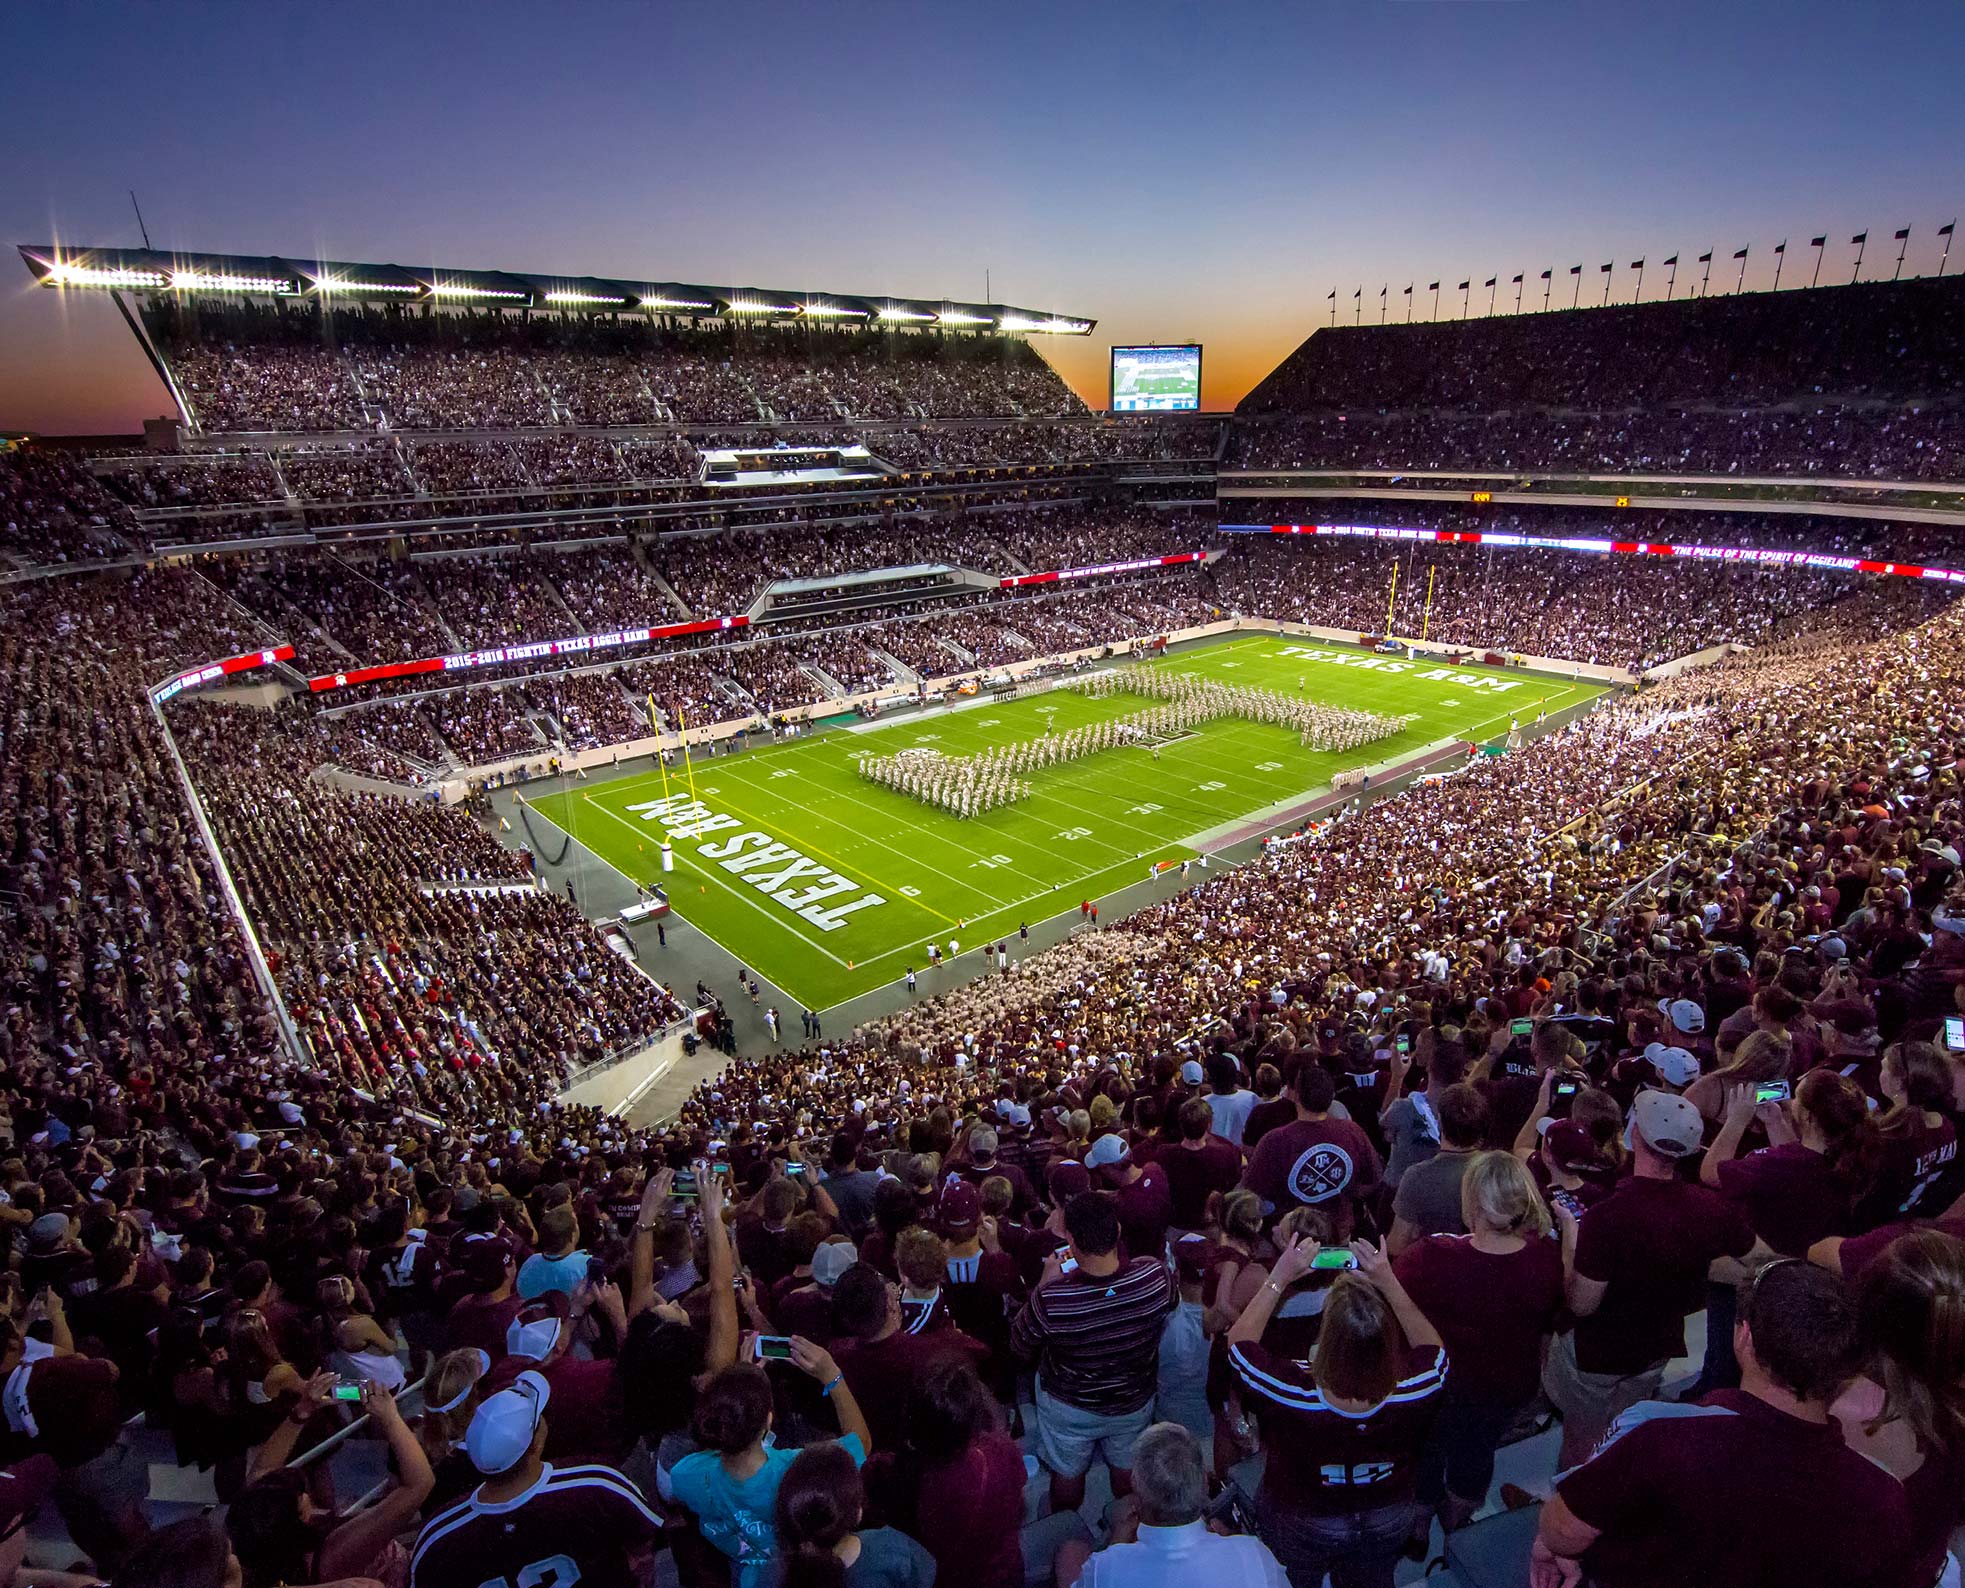 Inside of Kyle Field from the stands